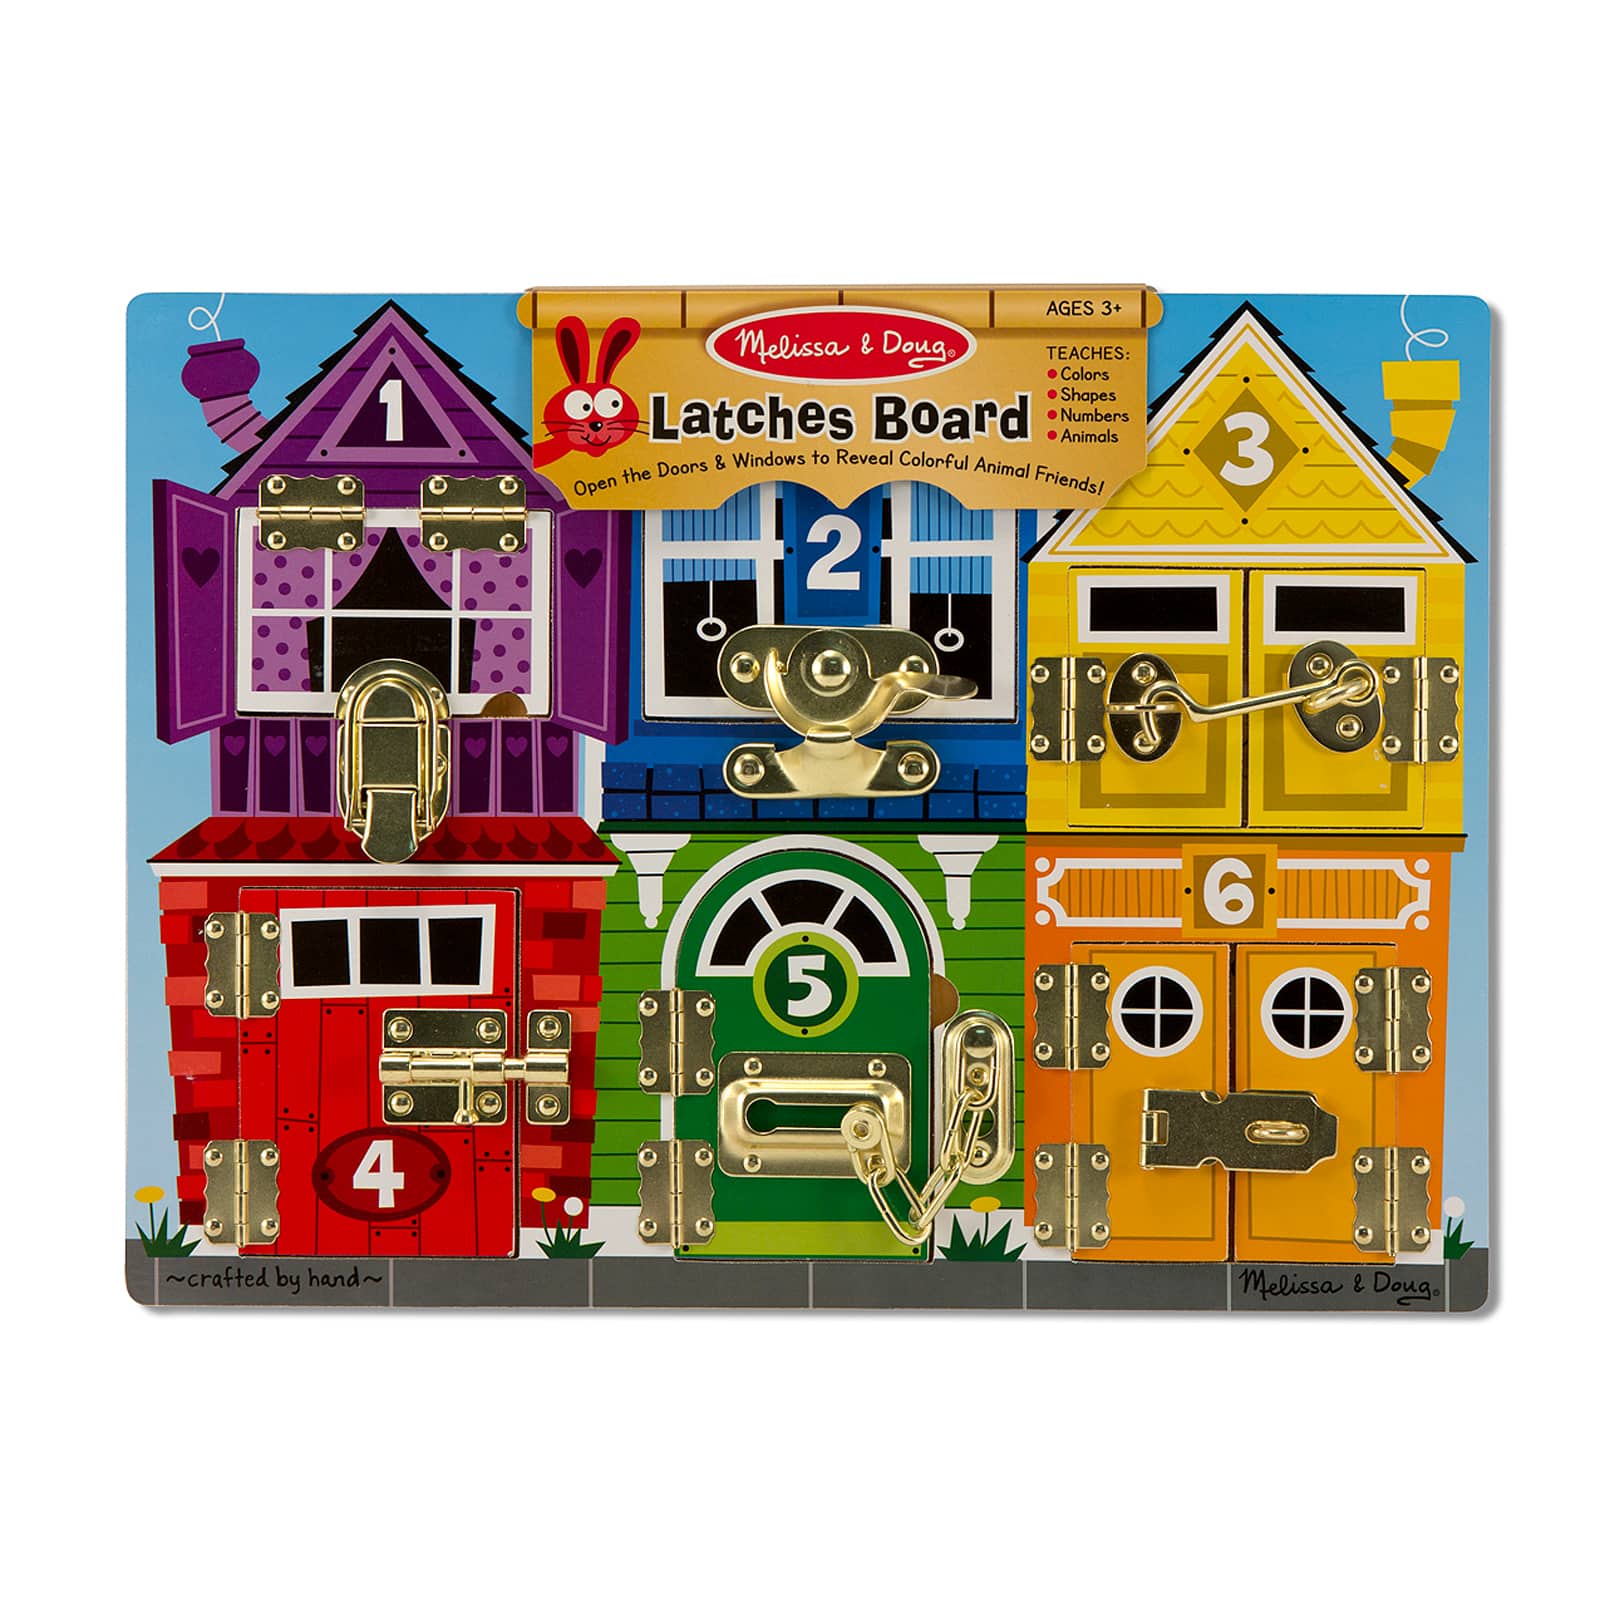 melissa & doug locks and latches board wooden educational toy